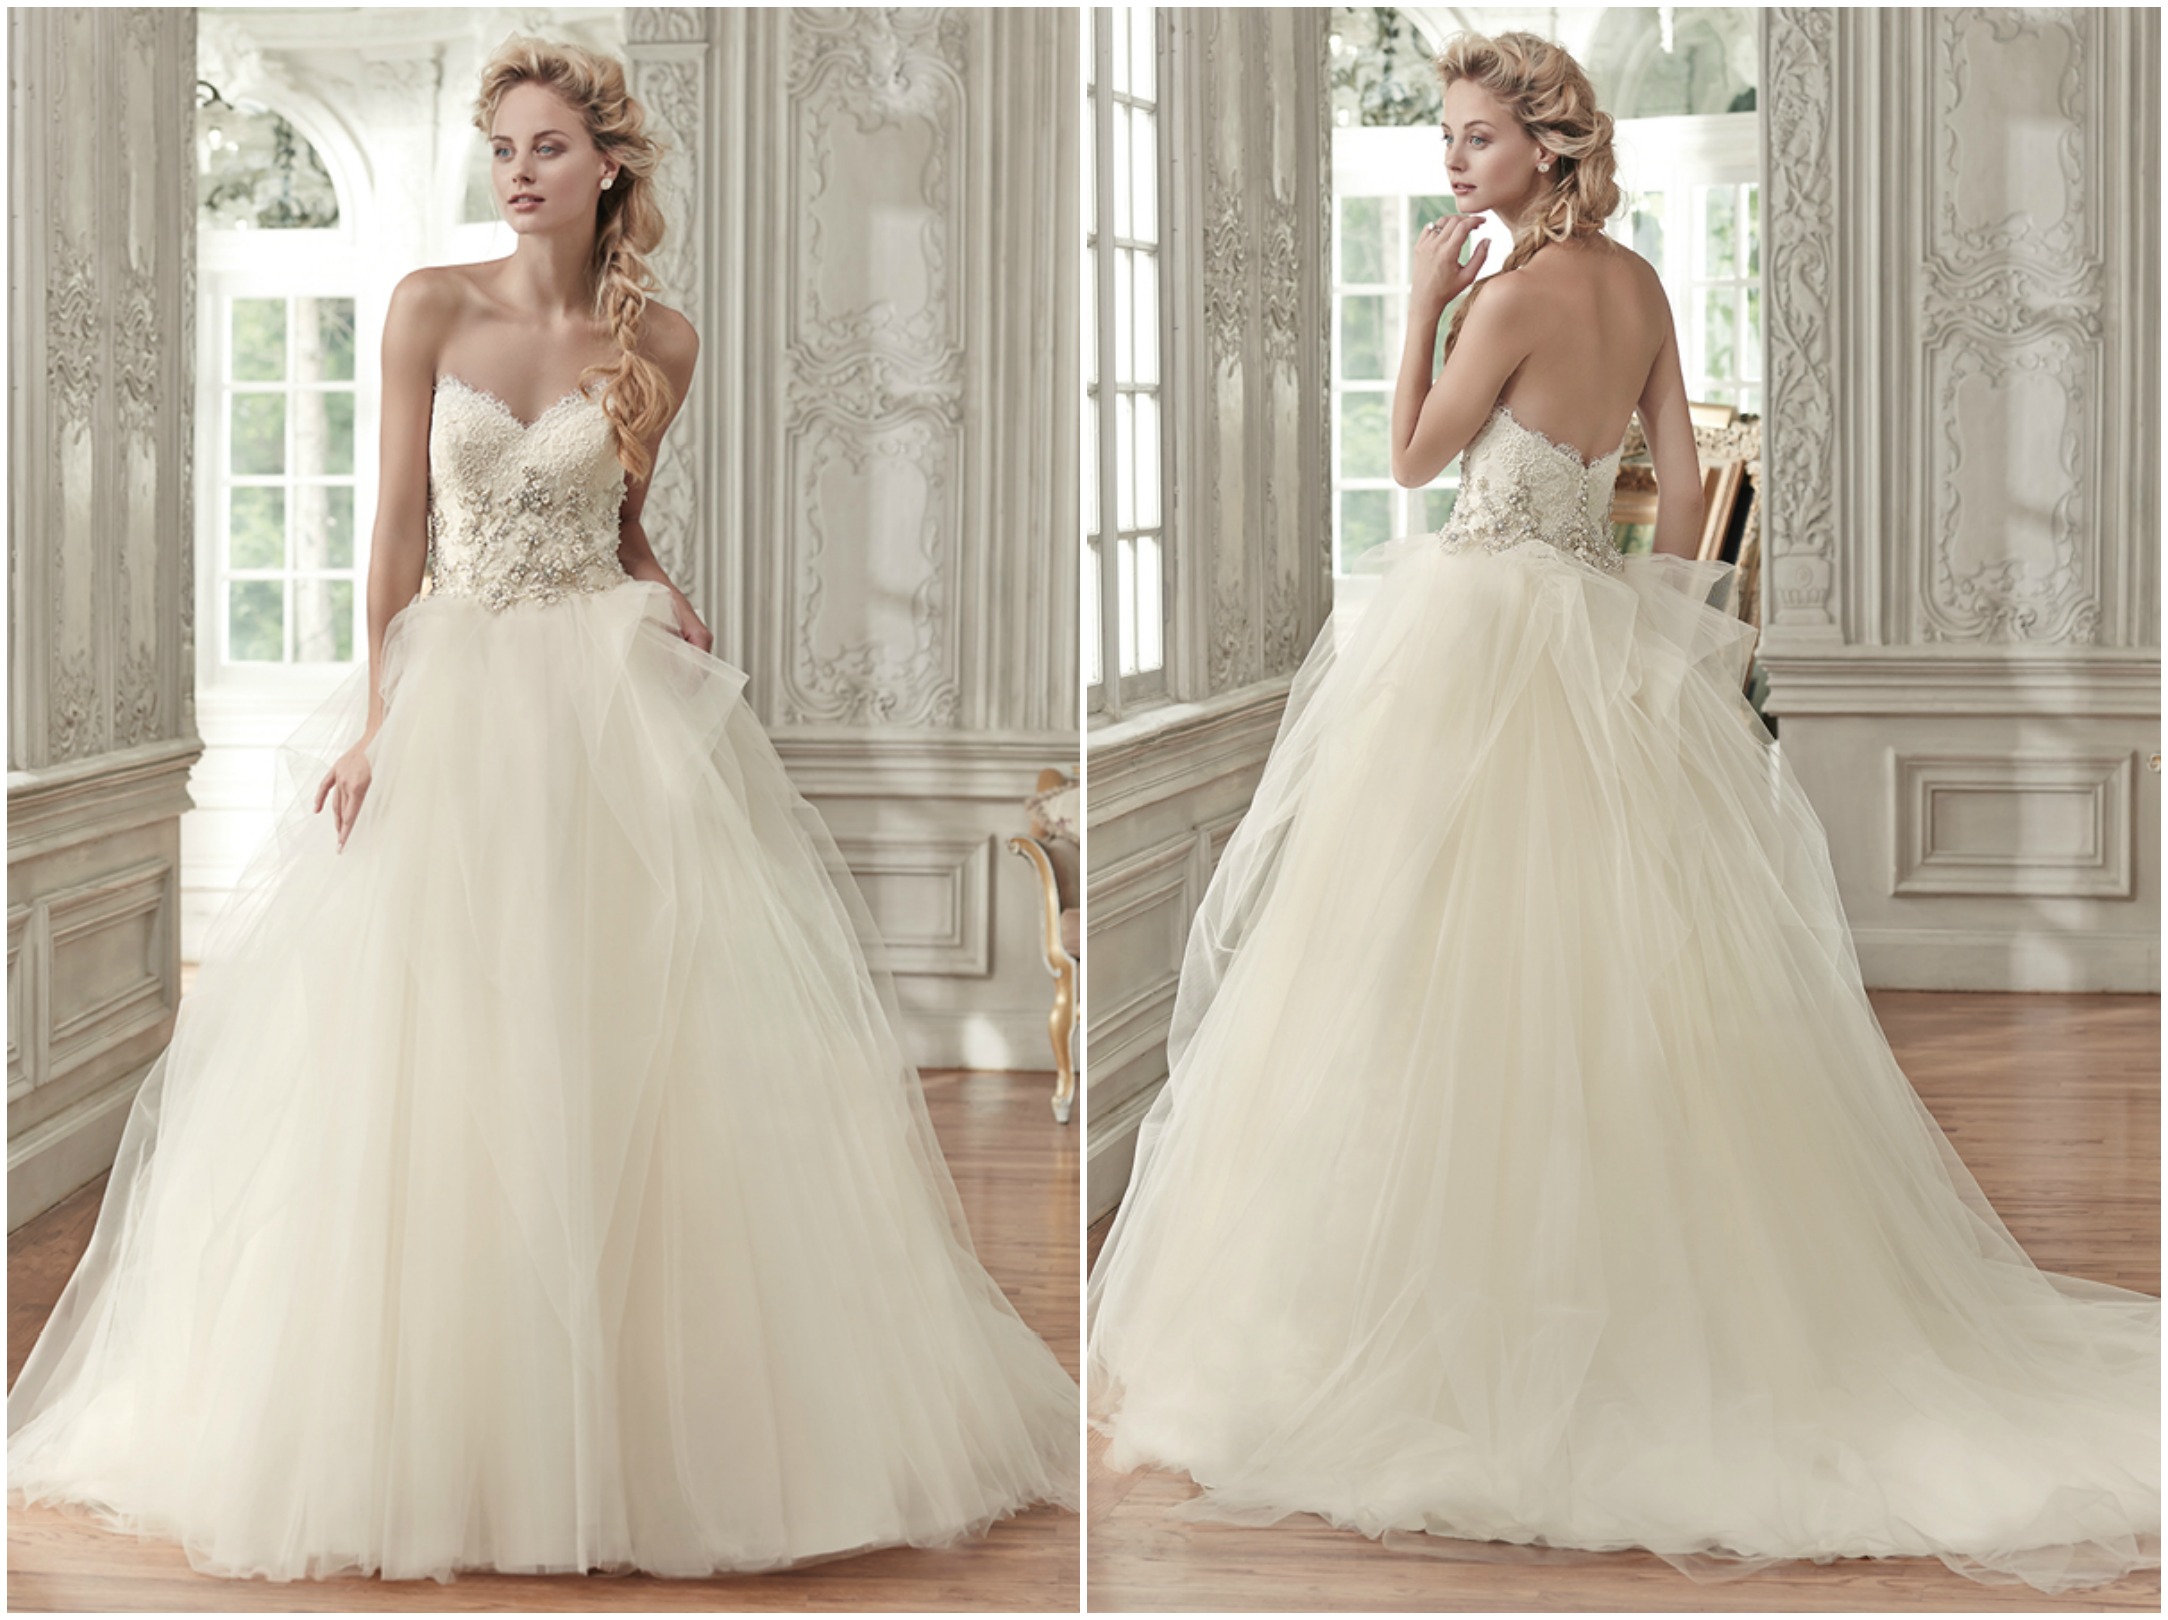 <a href="http://www.maggiesottero.com/maggie-sottero/aracella/9541" target="_blank">Maggie Sottero Spring 2016</a>